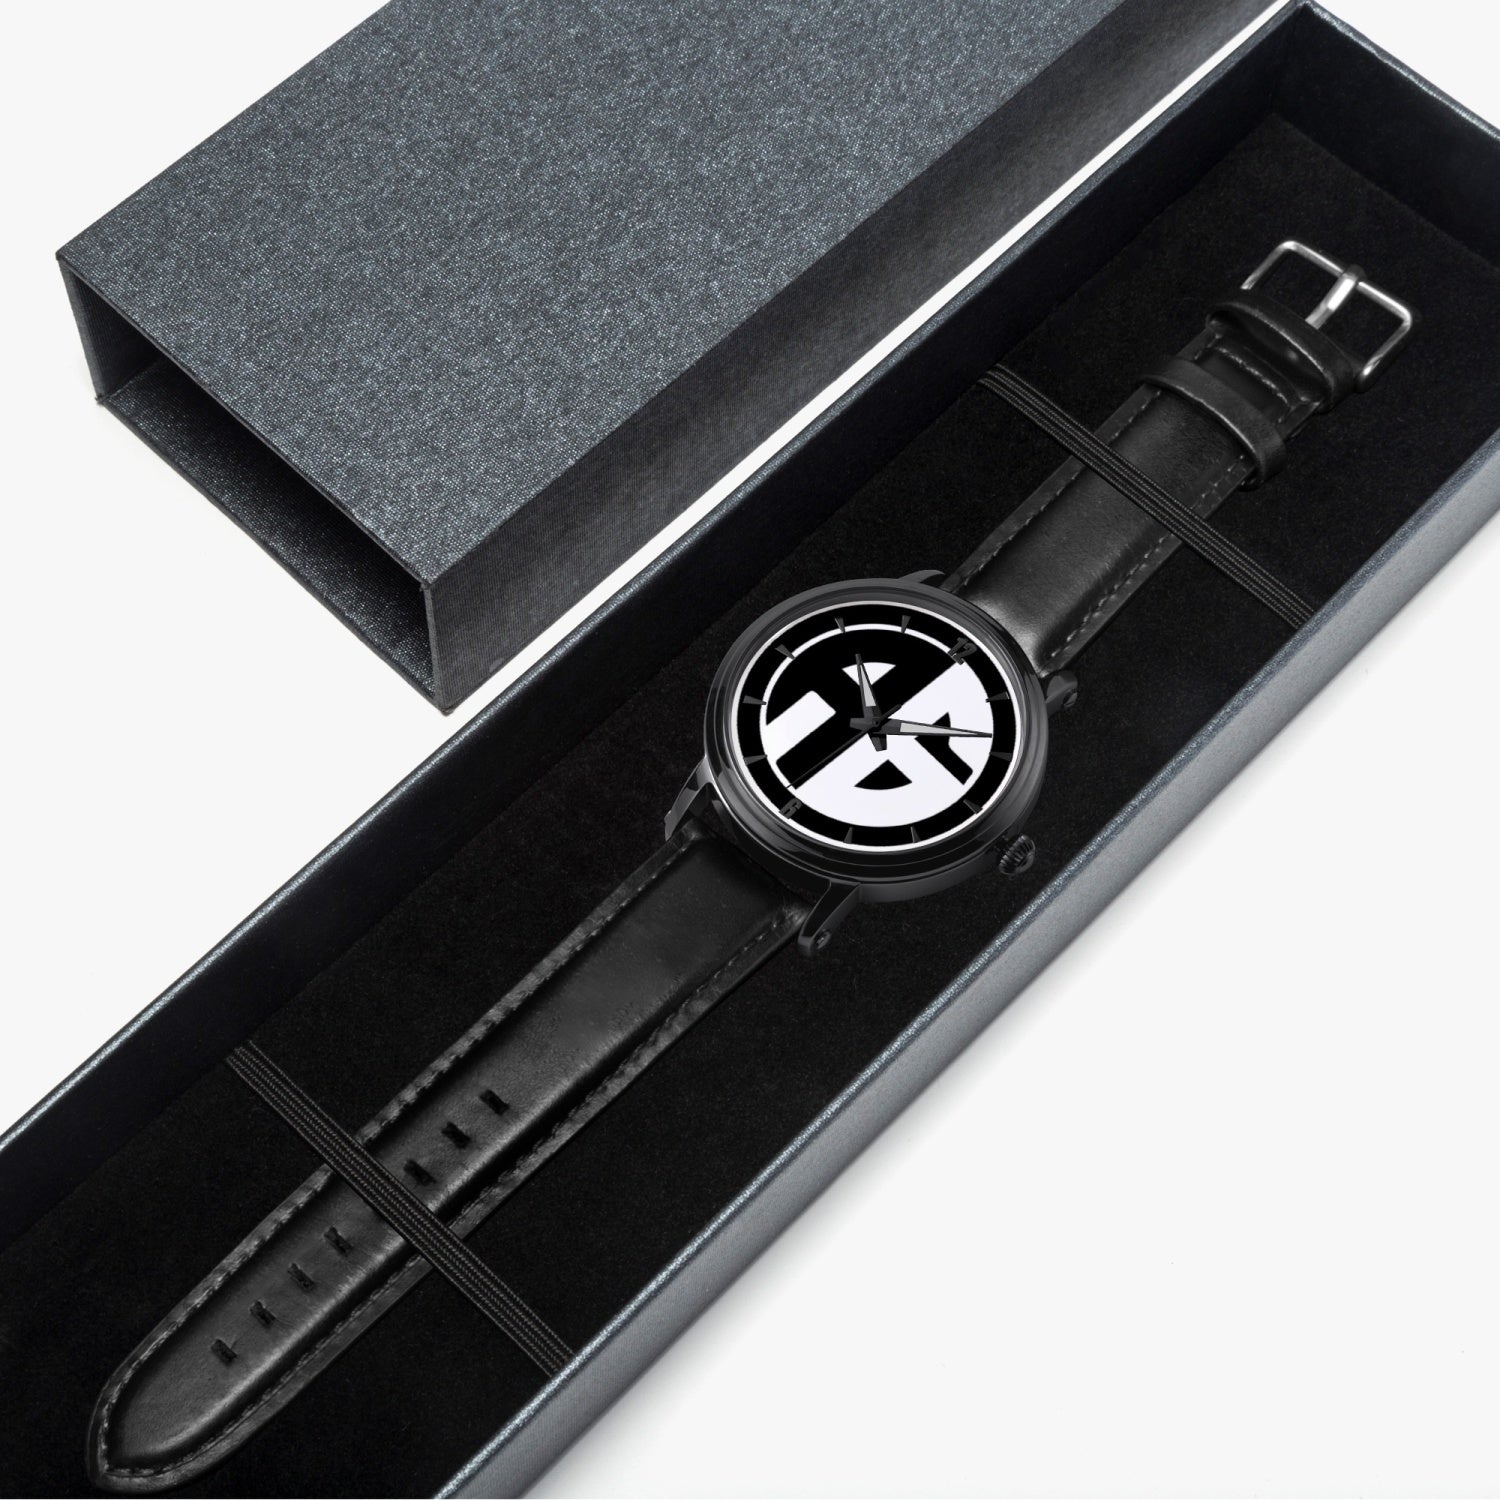 Black case with black band watch in box